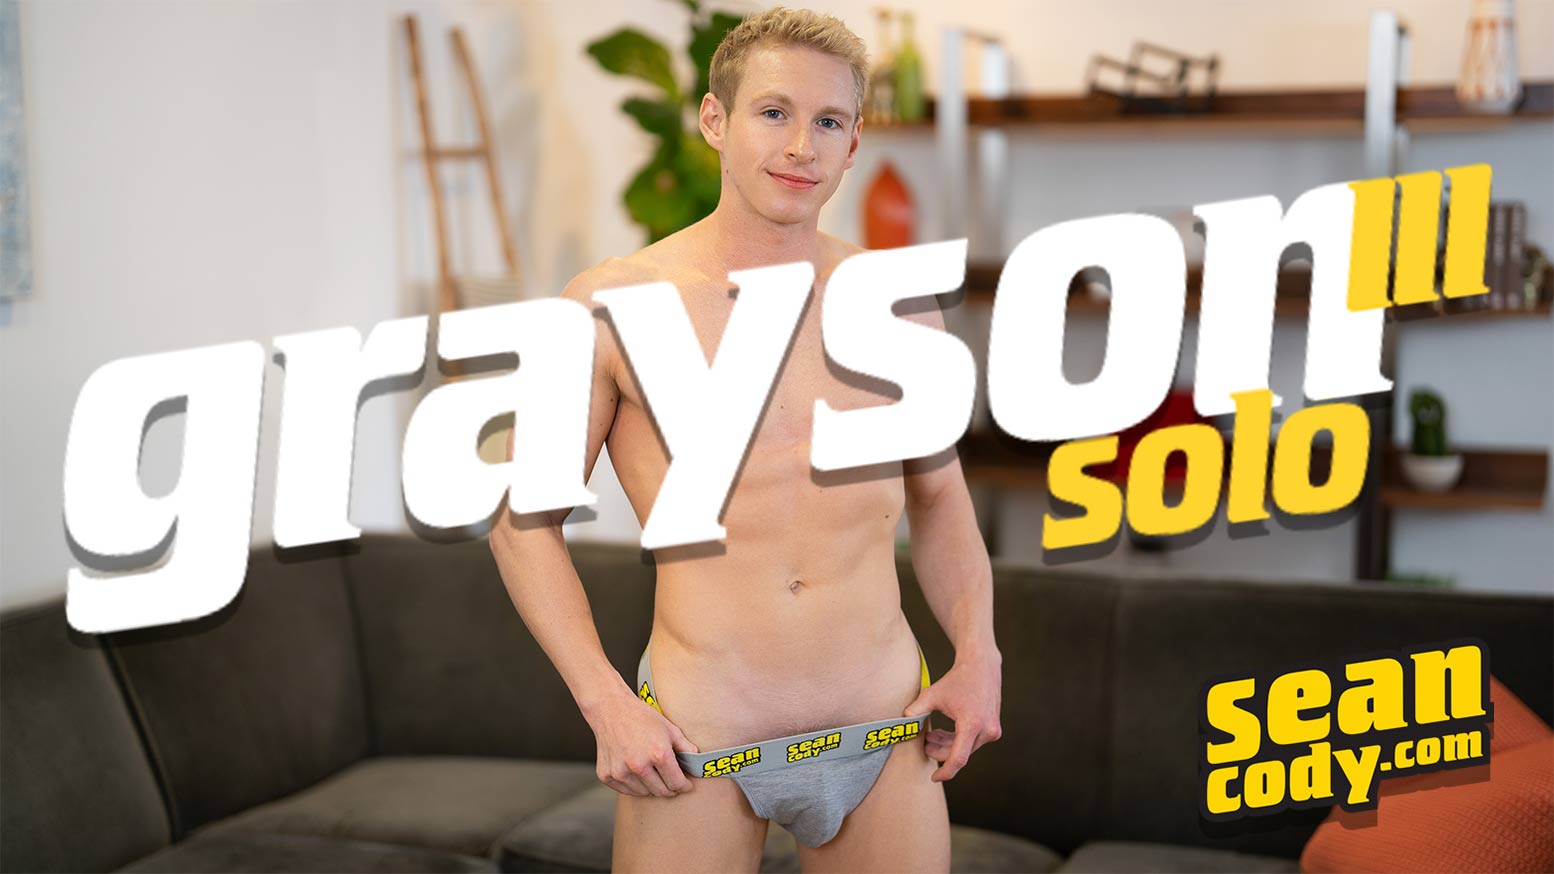 Newbie Stud Grayson: Charming, Muscular, and Well-Endowed